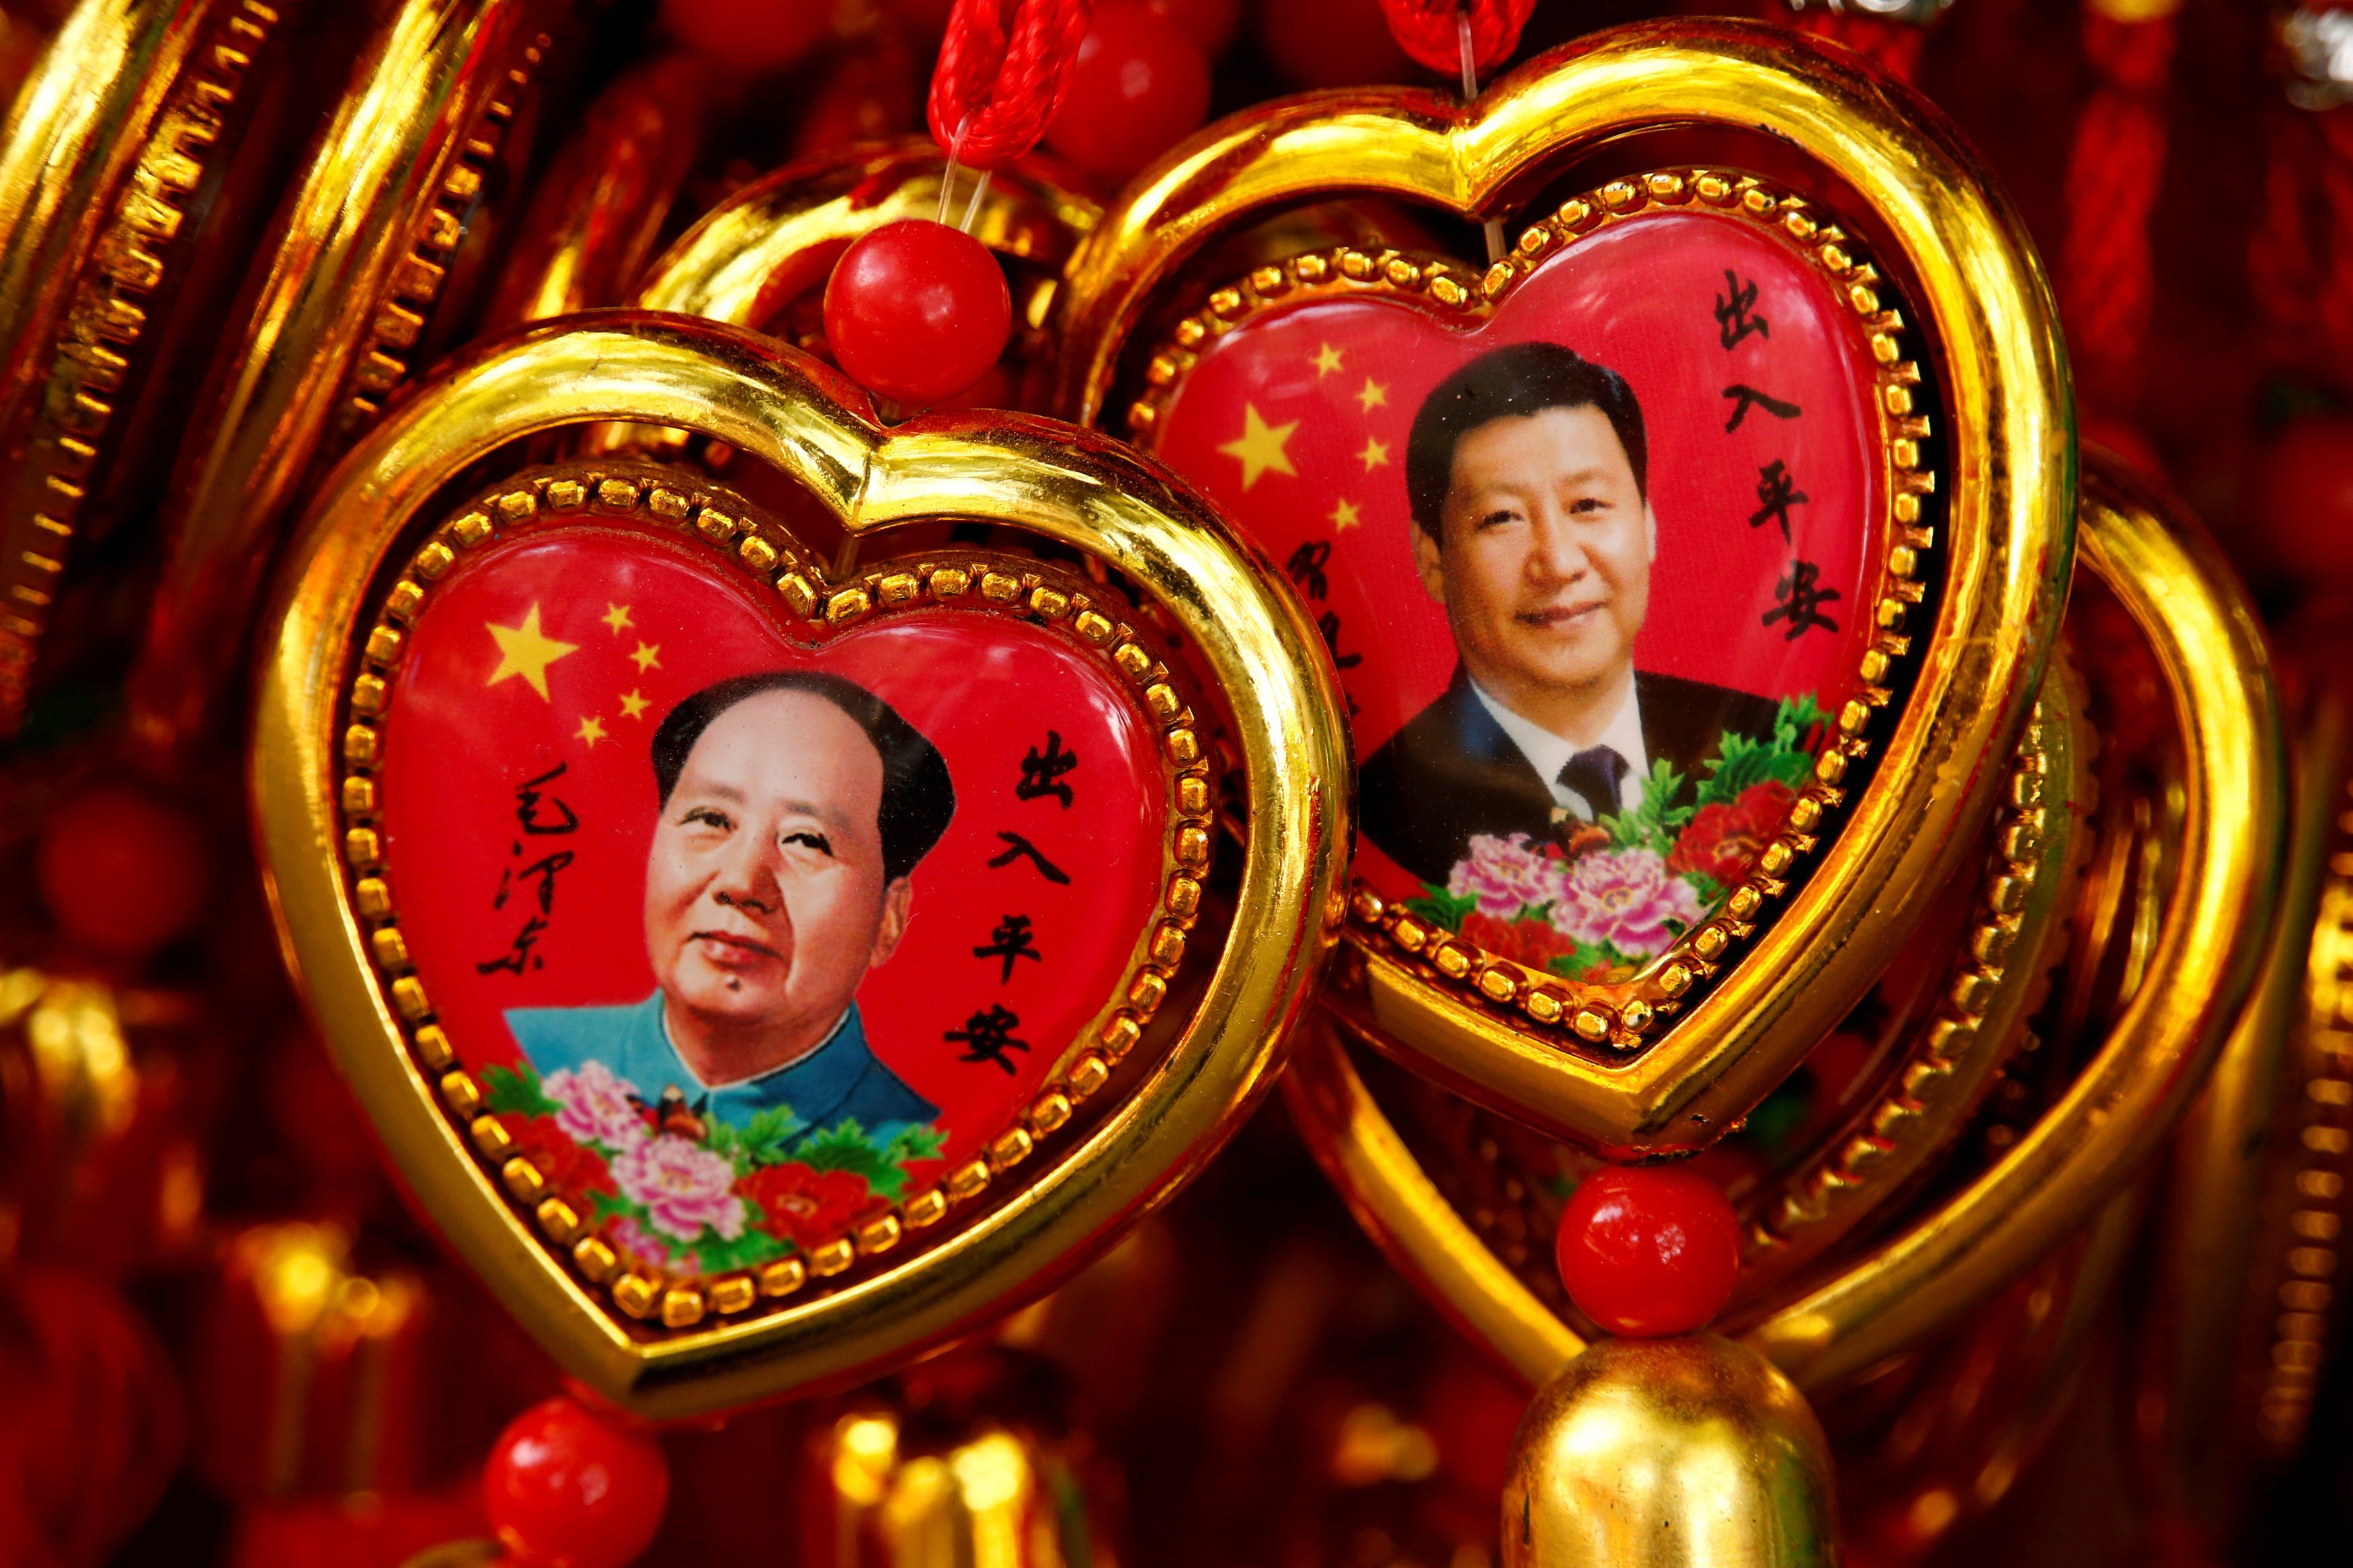 Portraits of President Xi Jinping and Mao Zedong feature on souvenirs on display at a shop near the Forbidden City in Beijing last year. Photo: Reuters